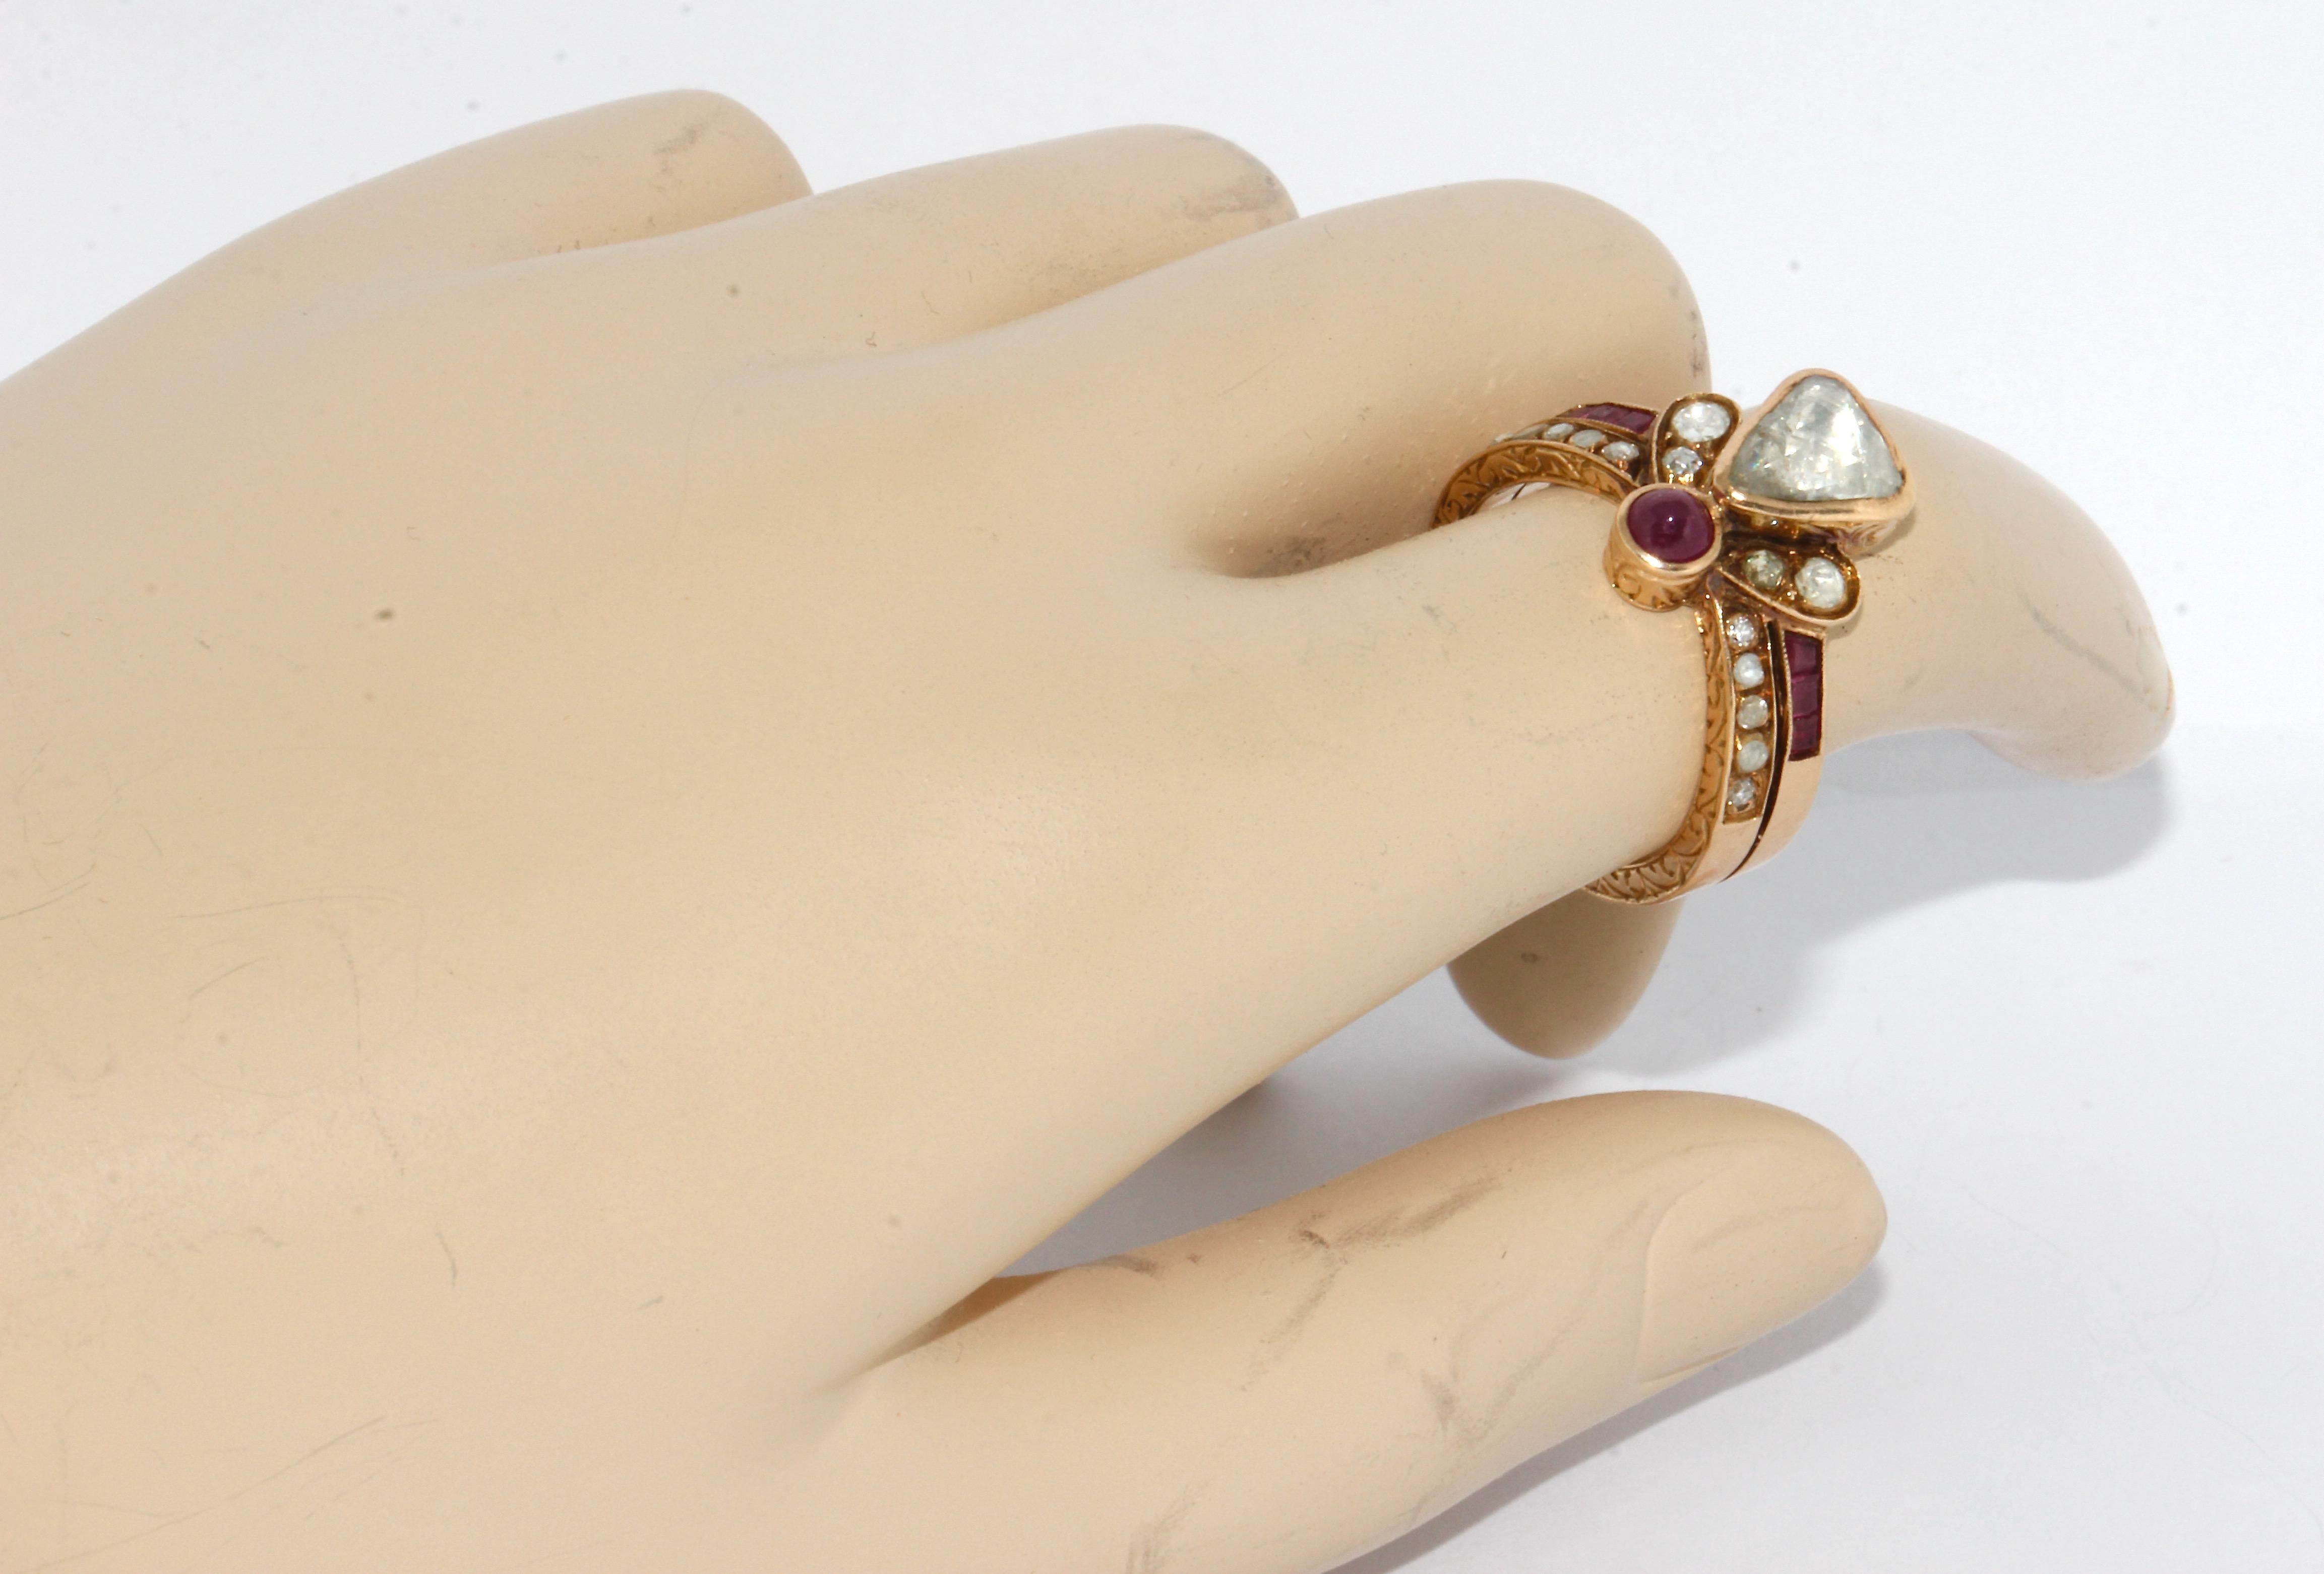 Antique, Royal Gold Ring with Rose Cut Trillion Diamond, Rubies and Ornaments For Sale 1